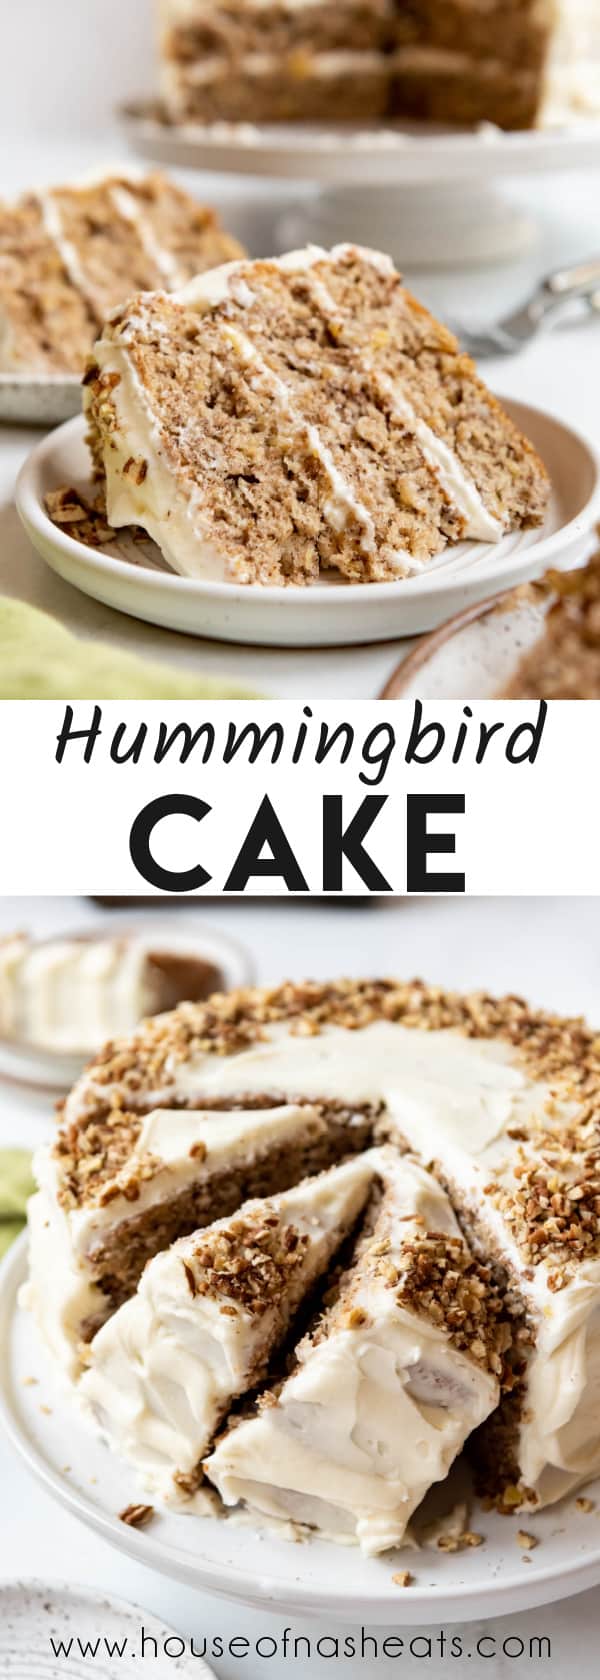 A collage of images of hummingbird cake with text overlay.